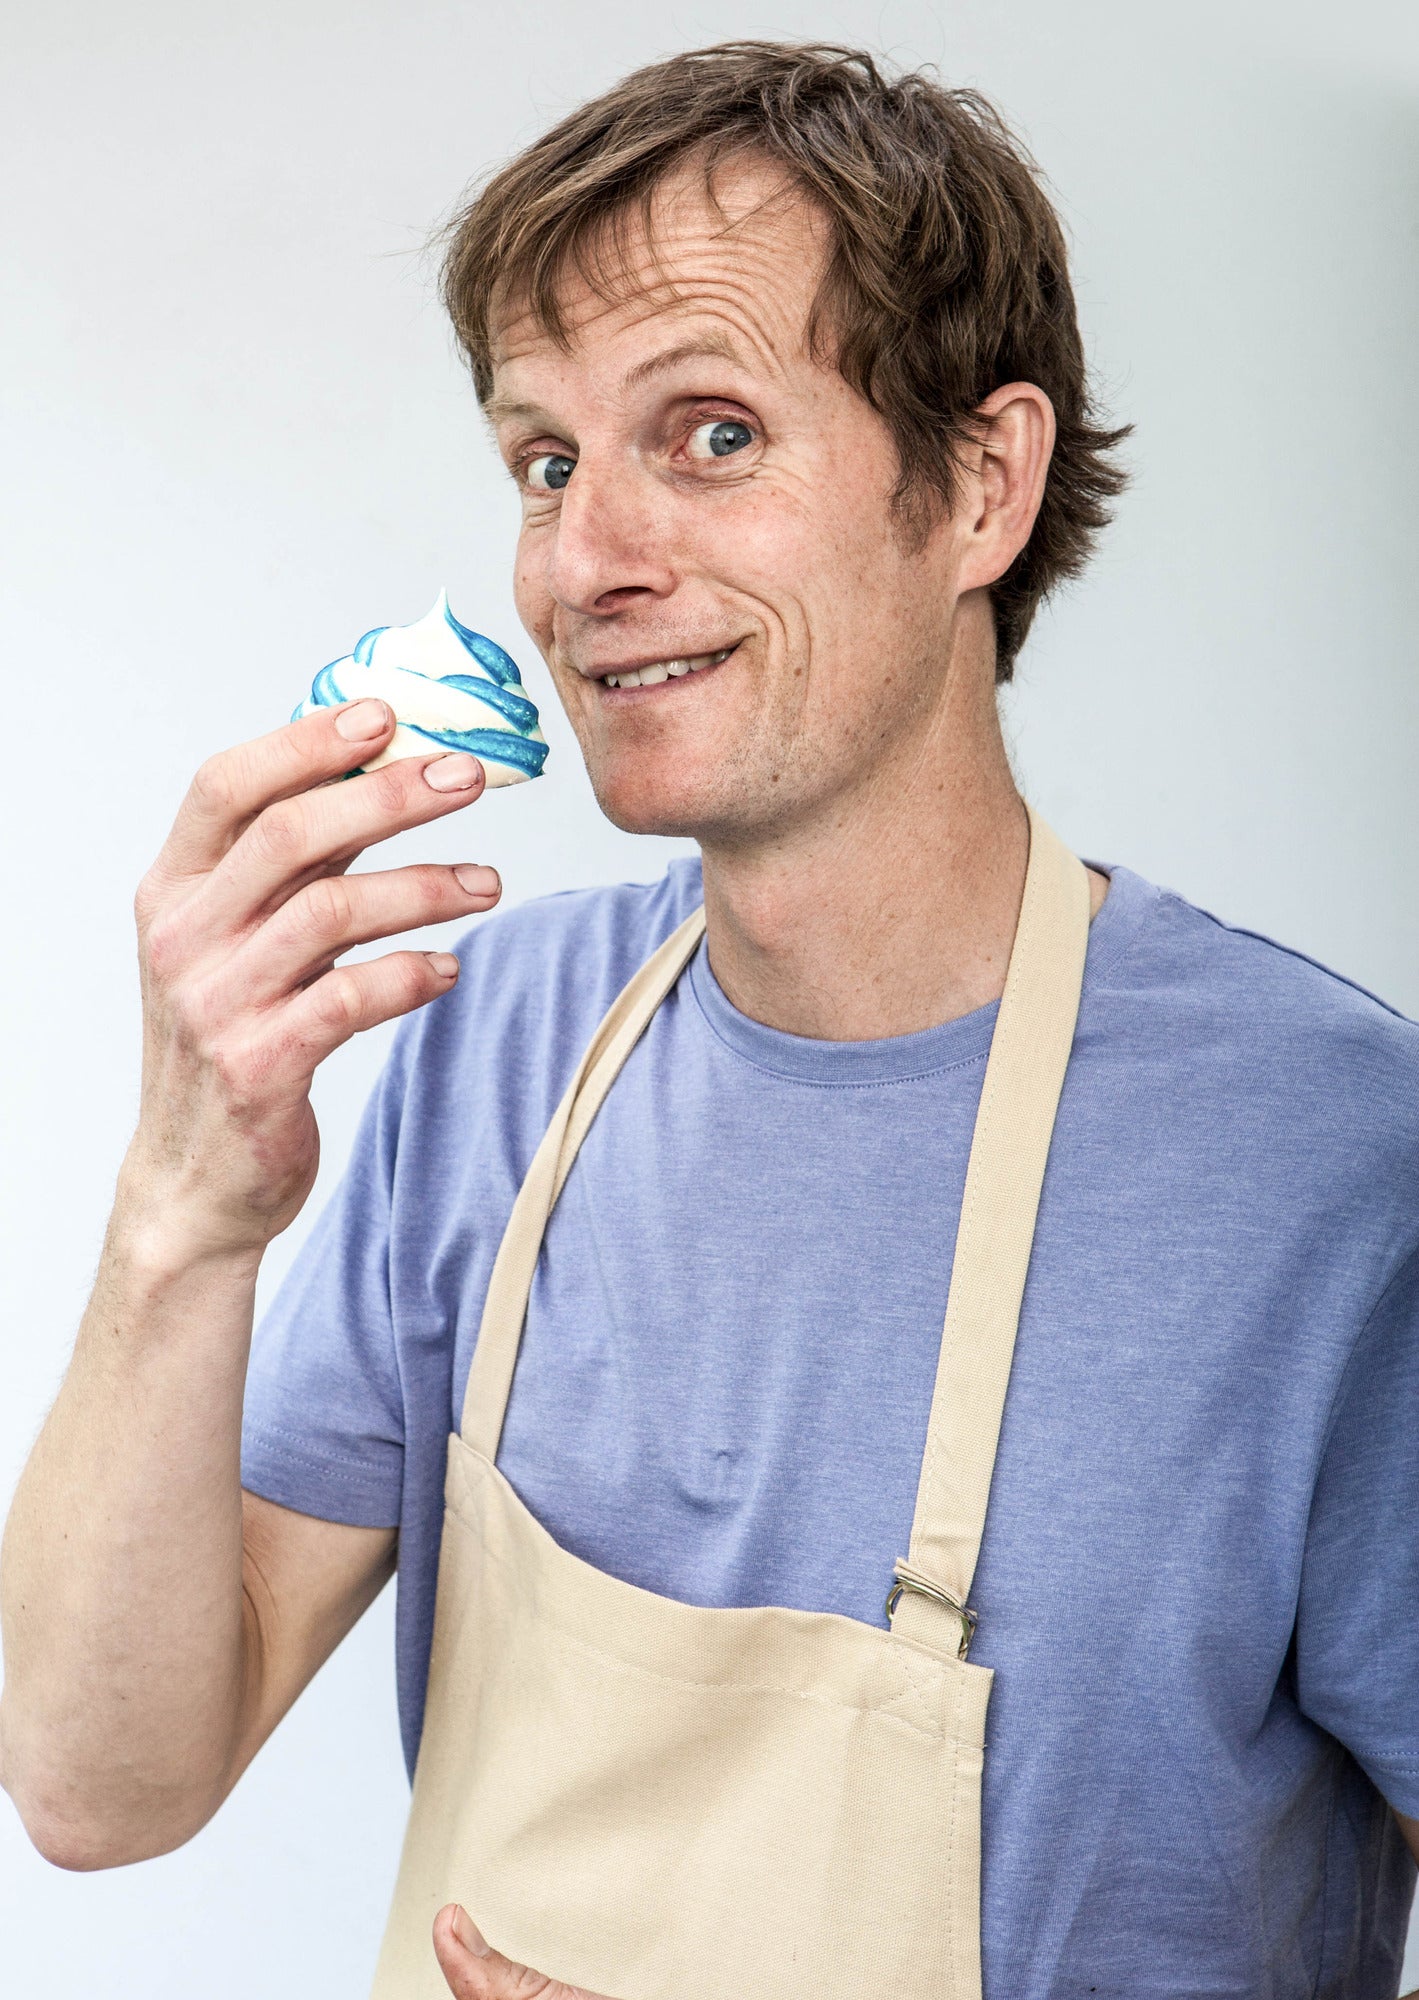 Bake Off finalist Ian takes the biscuit (or cupcake)